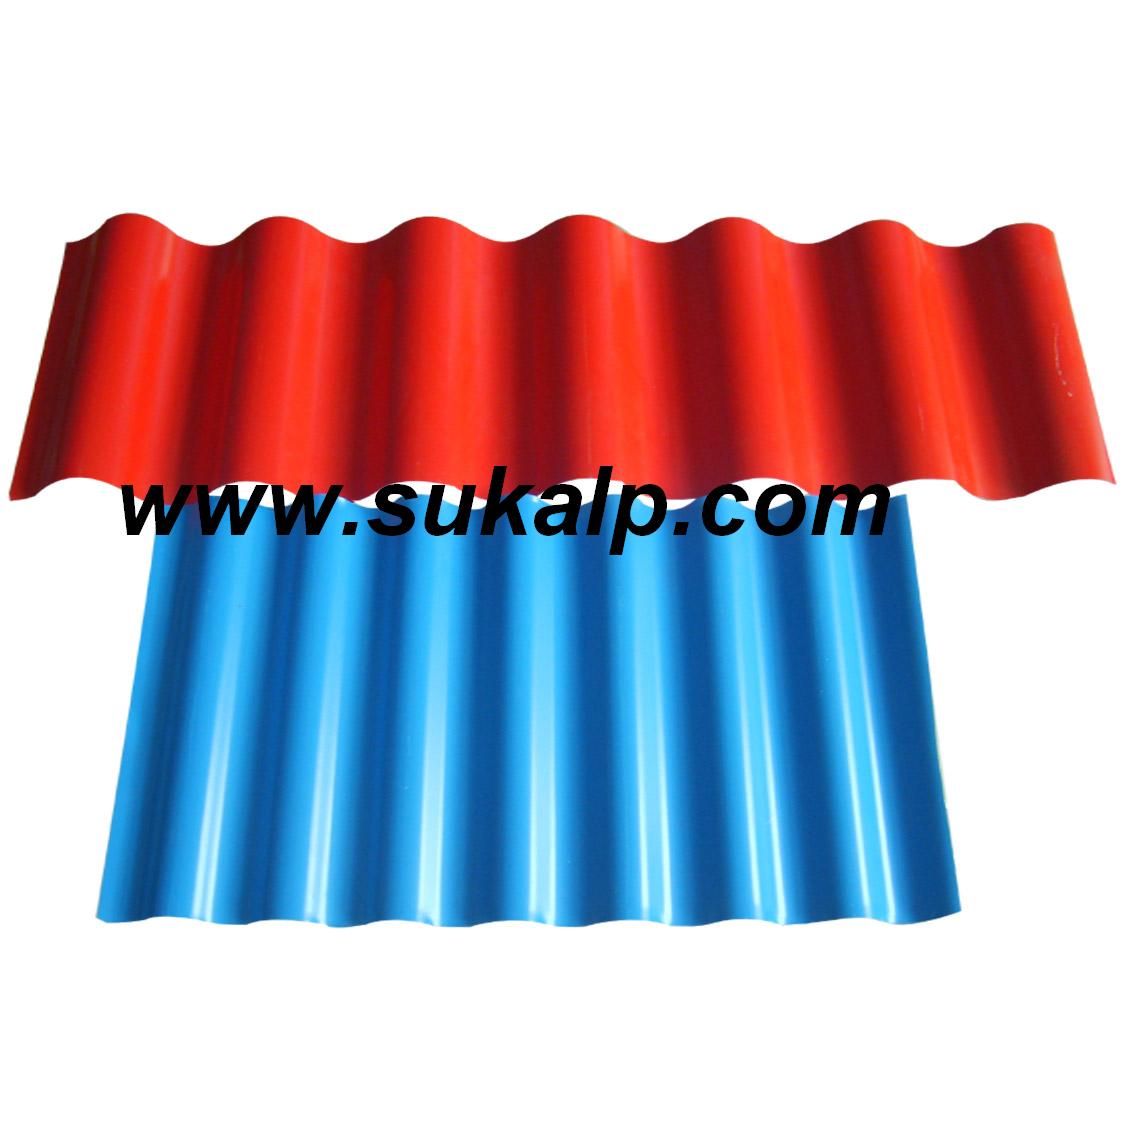 Colored Roofing Tile